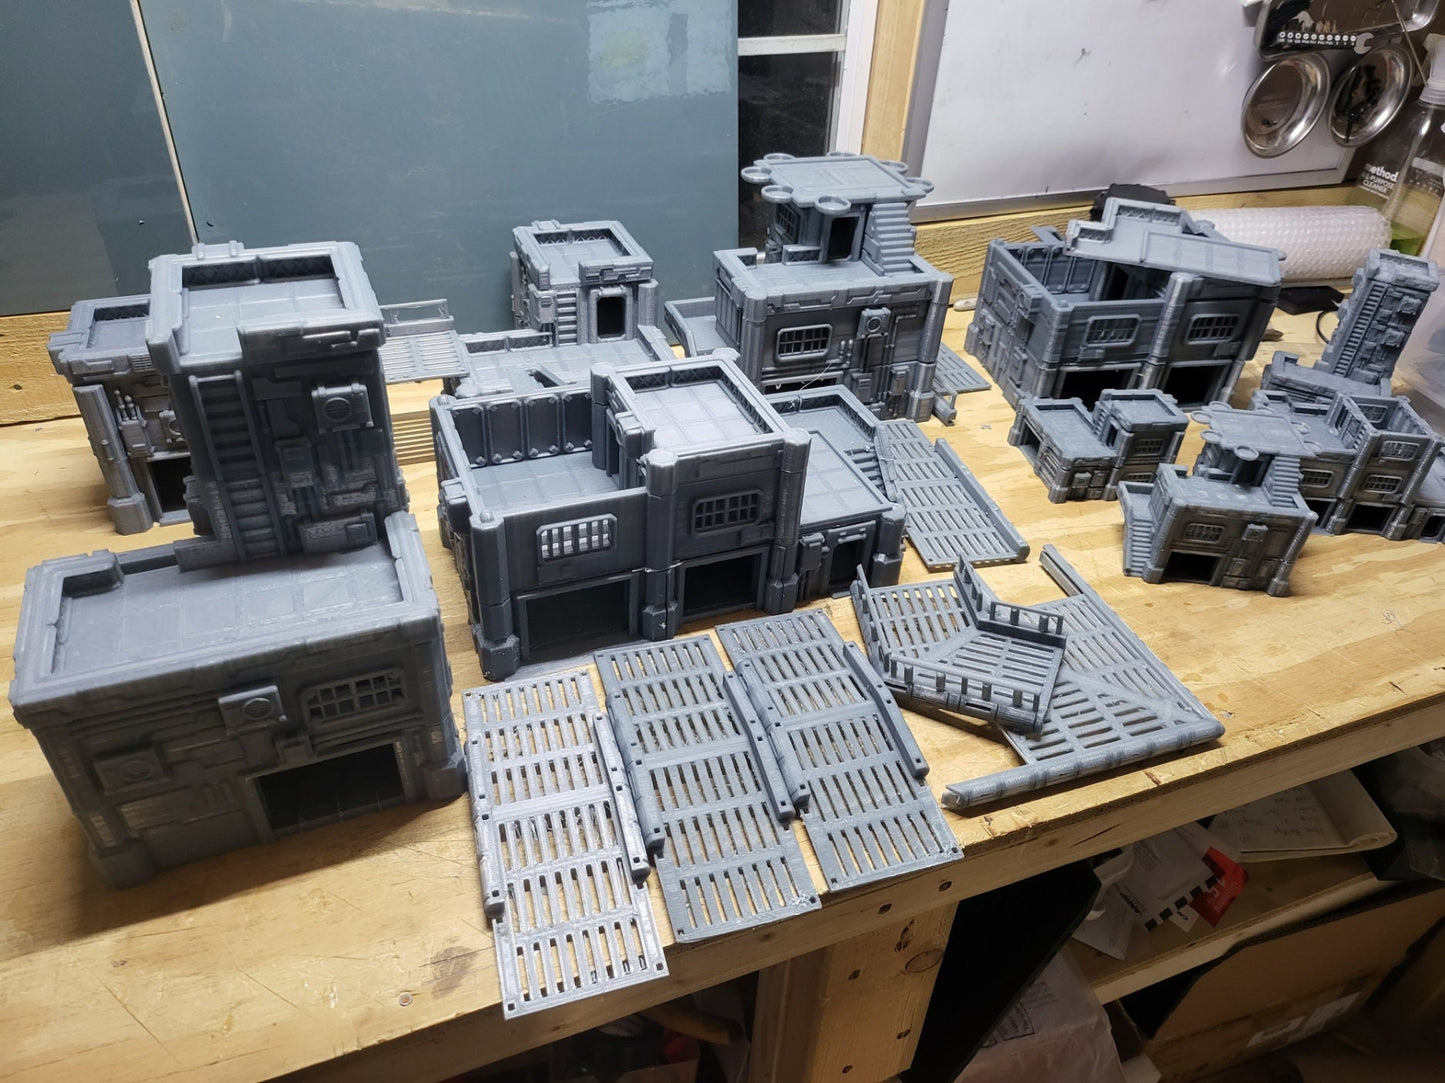 Power Station, Neo City, generator, station, shadowrun, Warhammer, Industrial, Sci-fi, Wargaming, Starfinder, Those Dark Places, Tales from the Loop Shadowrun,Scum and Villainy,Cyberpunk Red,Blue Planet, Tabletop Gaming, Tabletop Terrain, Warhammer